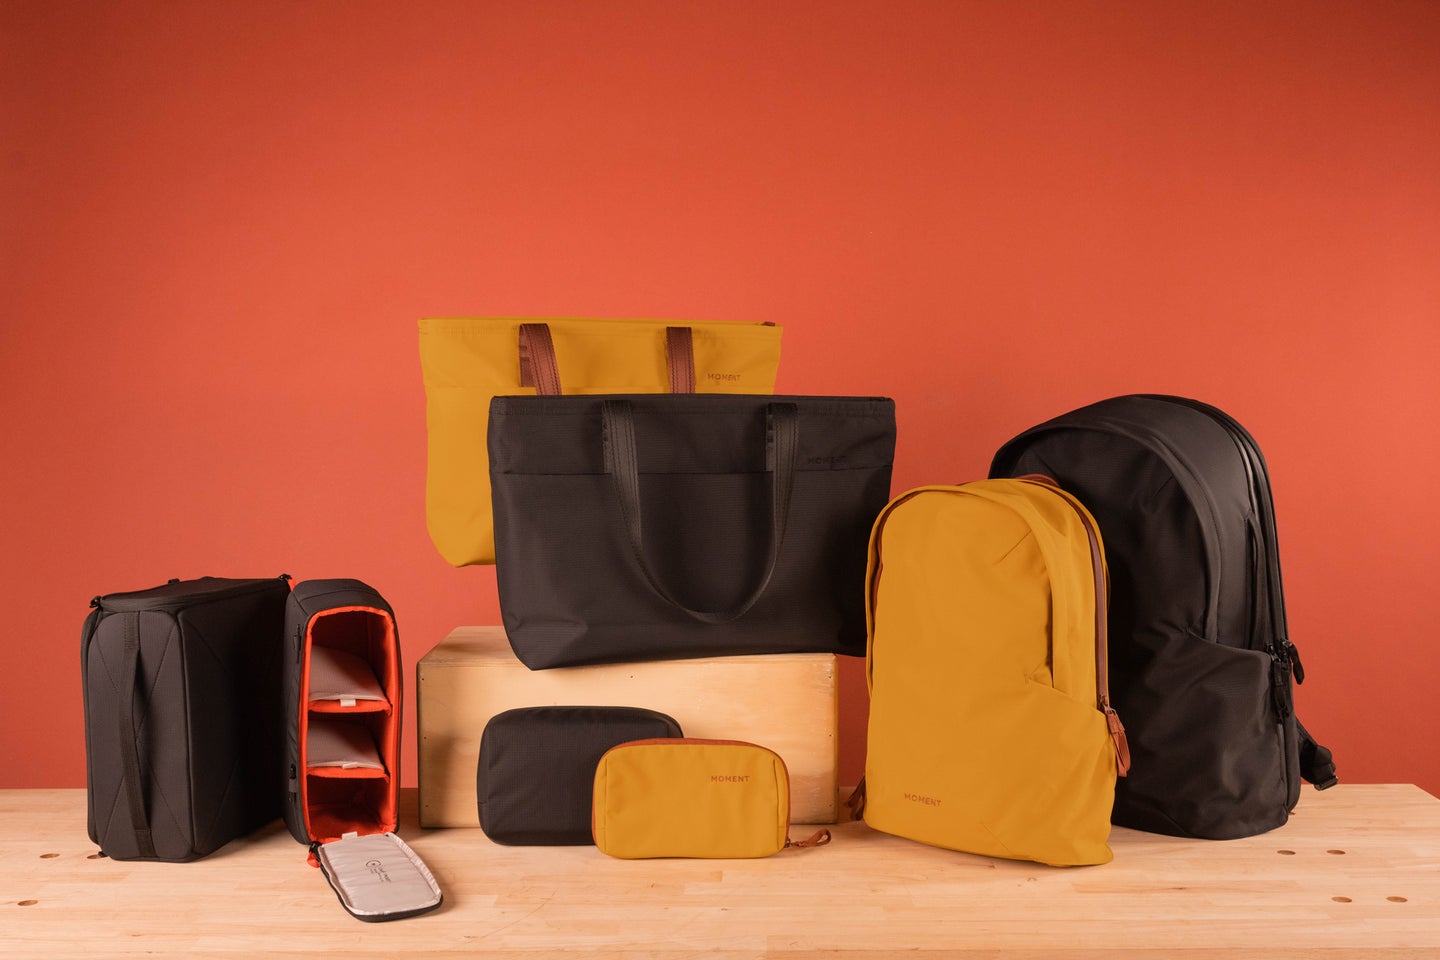 The Moment Everything Bag lineup against a red-orange background